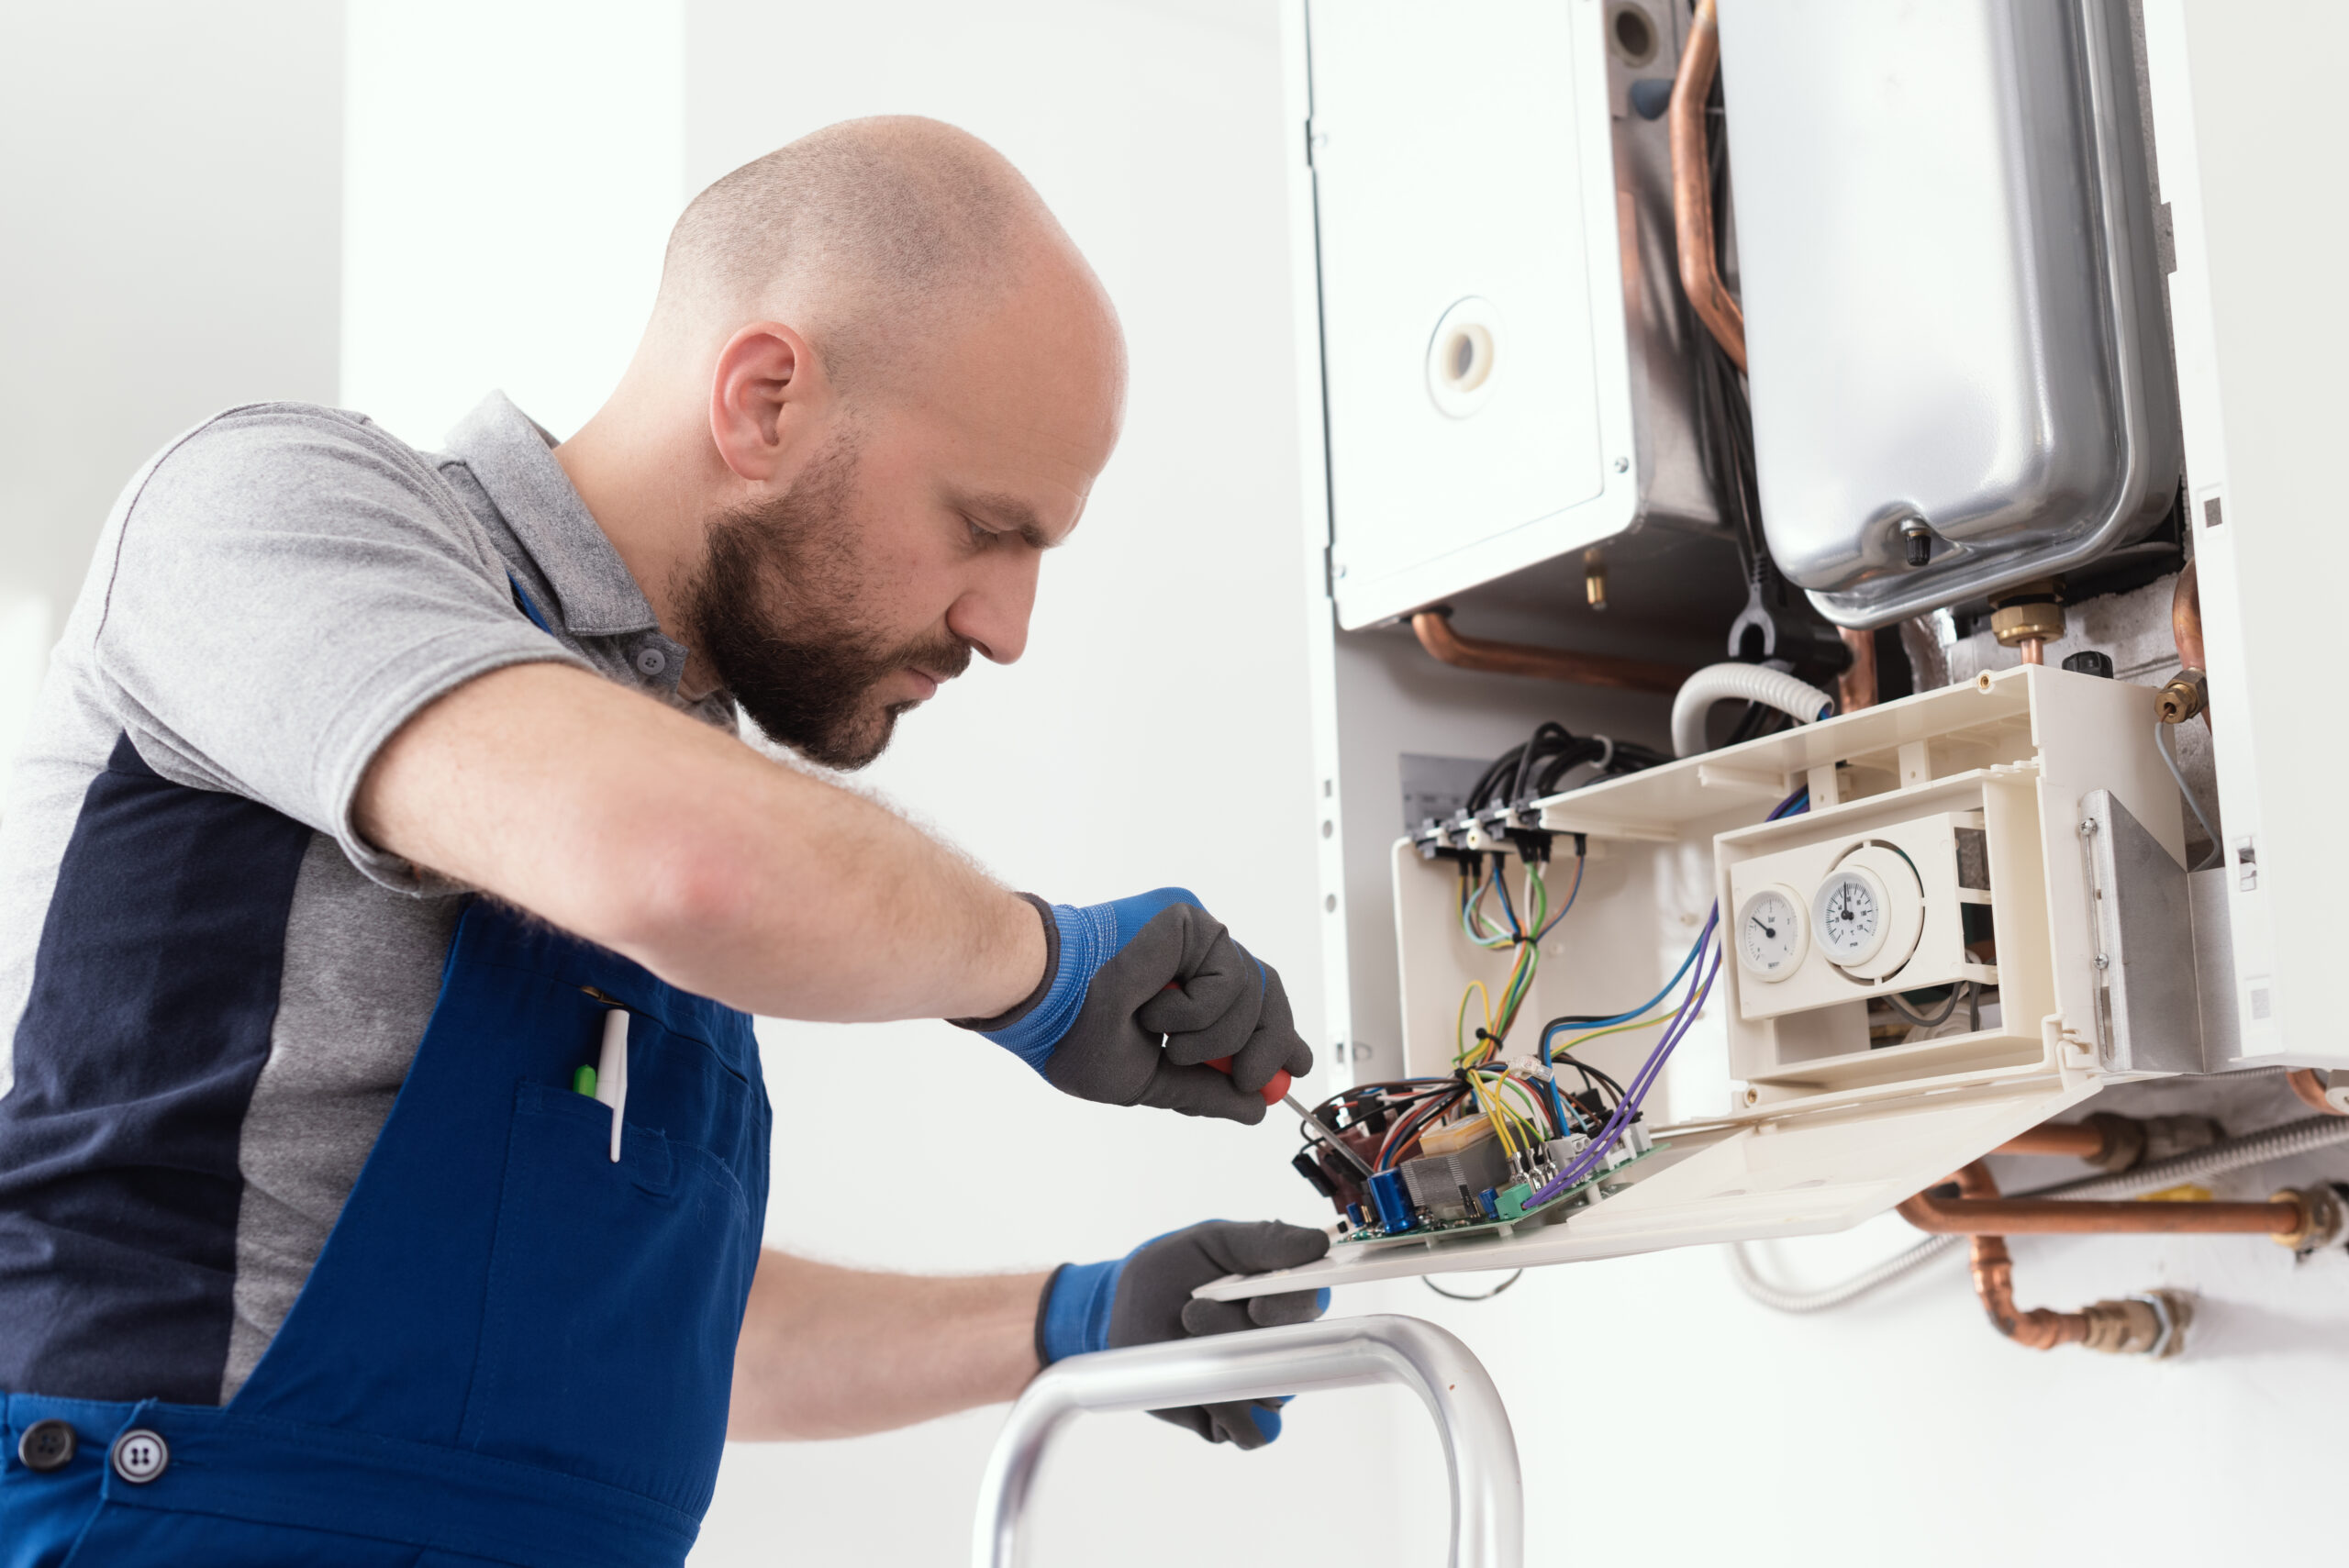 HVAC technician performing a repair service on the home's heating system